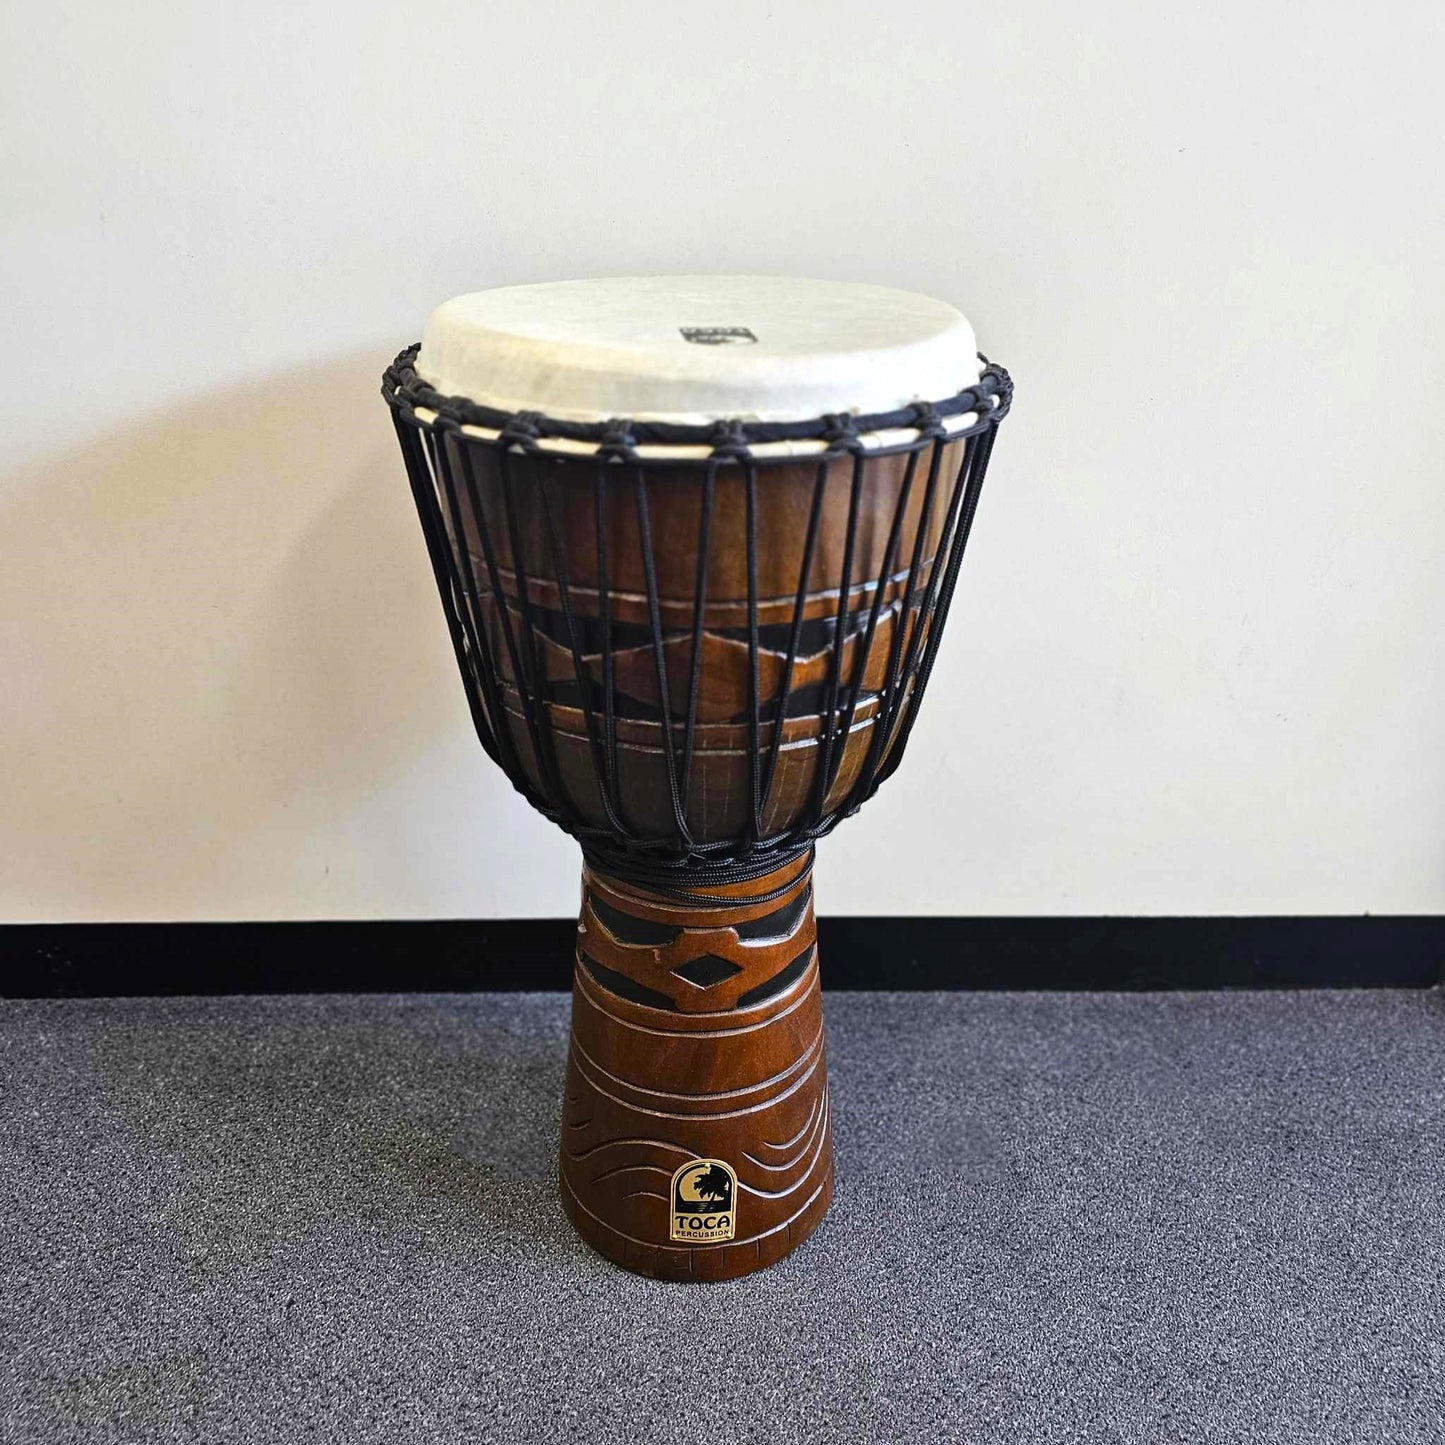 Toca 12" Rope Tuned Origins Series Djembe in African Mask Finish